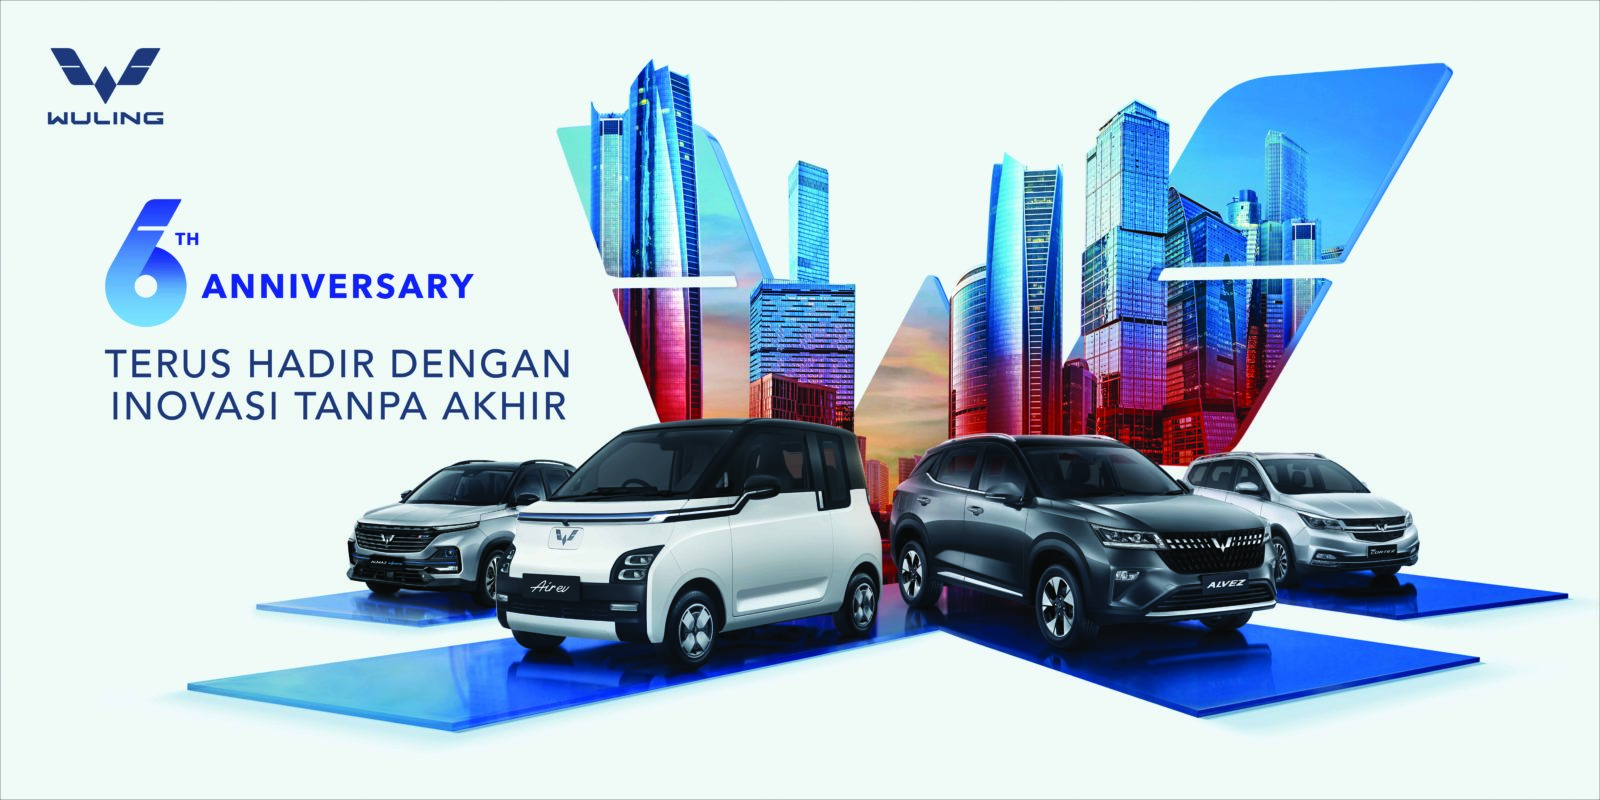 Image Celebrating Six Years in Indonesia, Wuling Continues to Present Endless Innovations